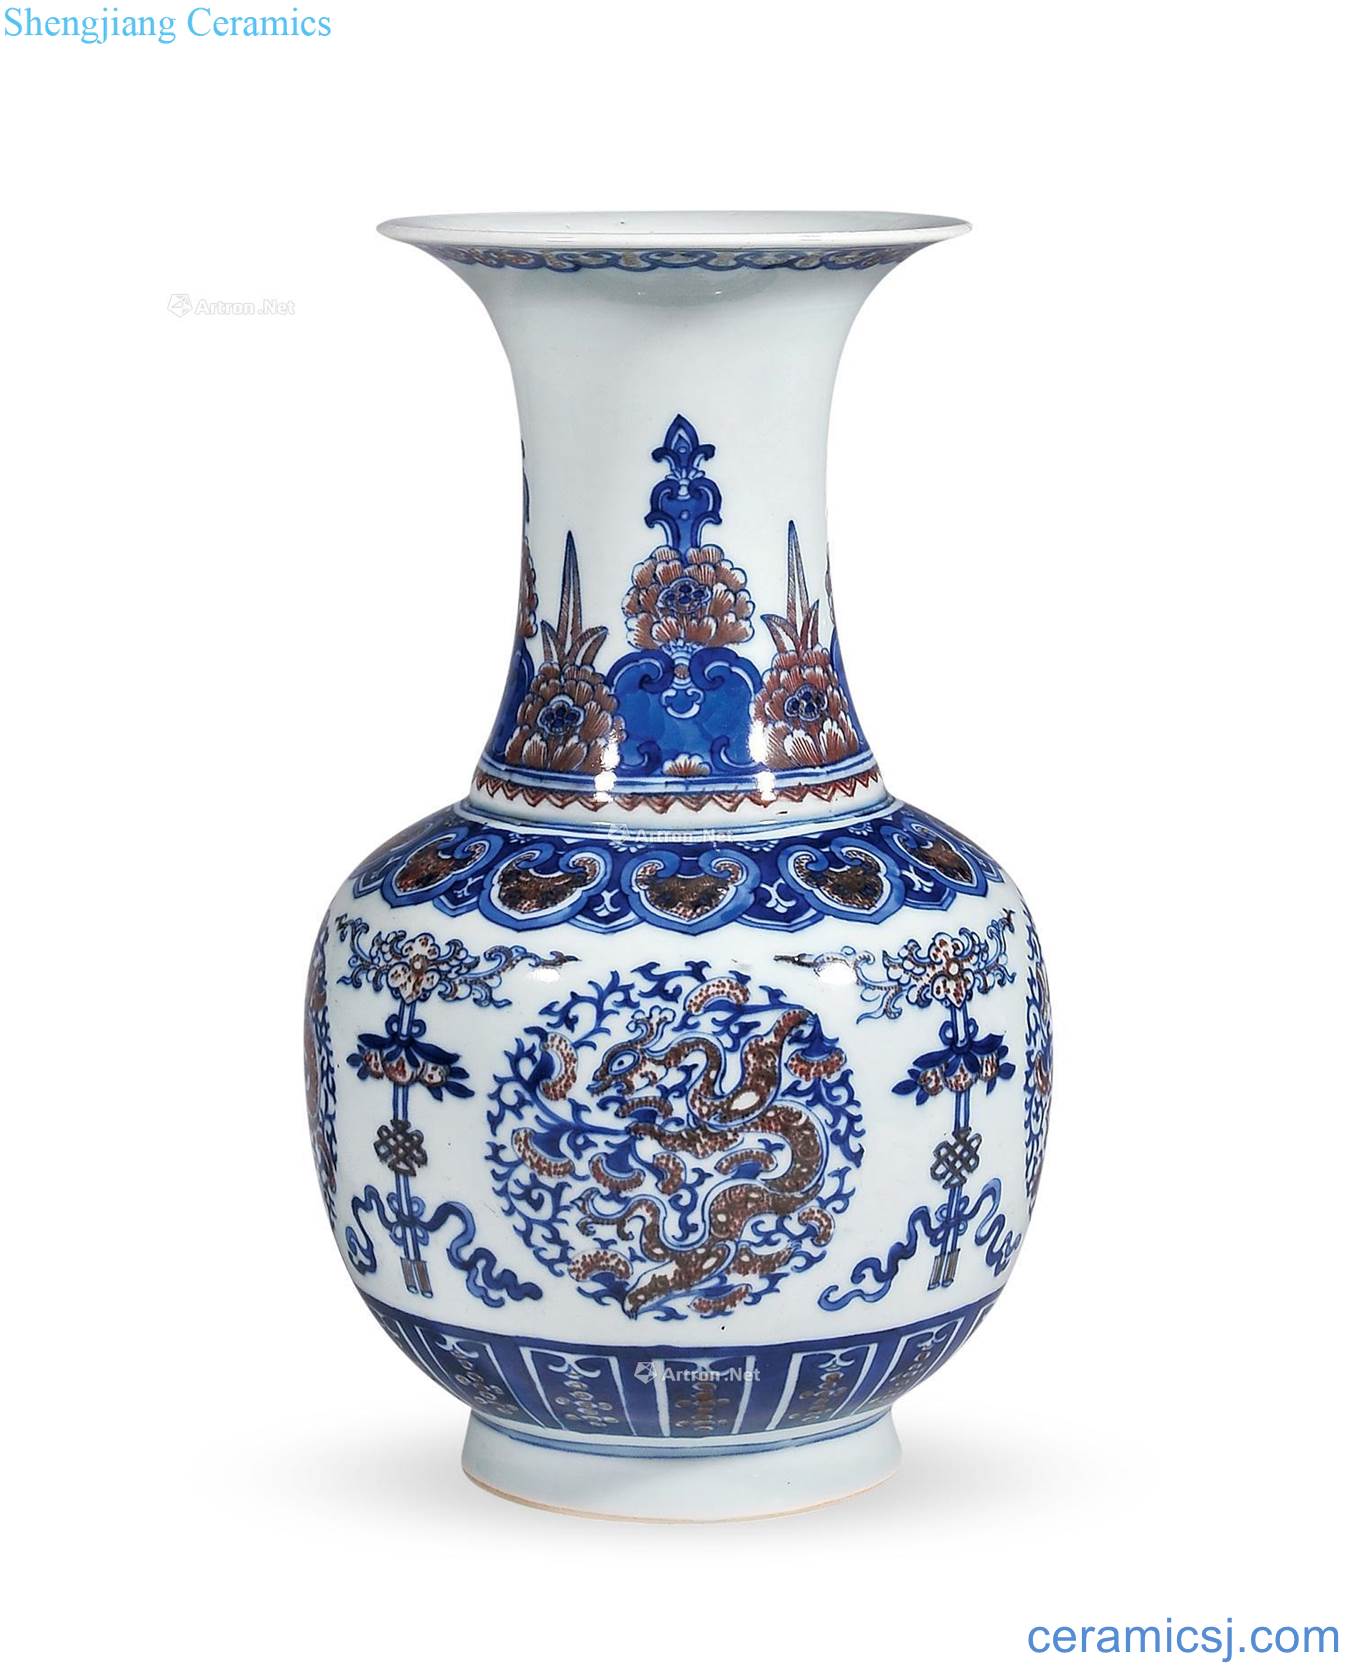 In the 18th century qing Blue and white youligong red dragon grain left mouth